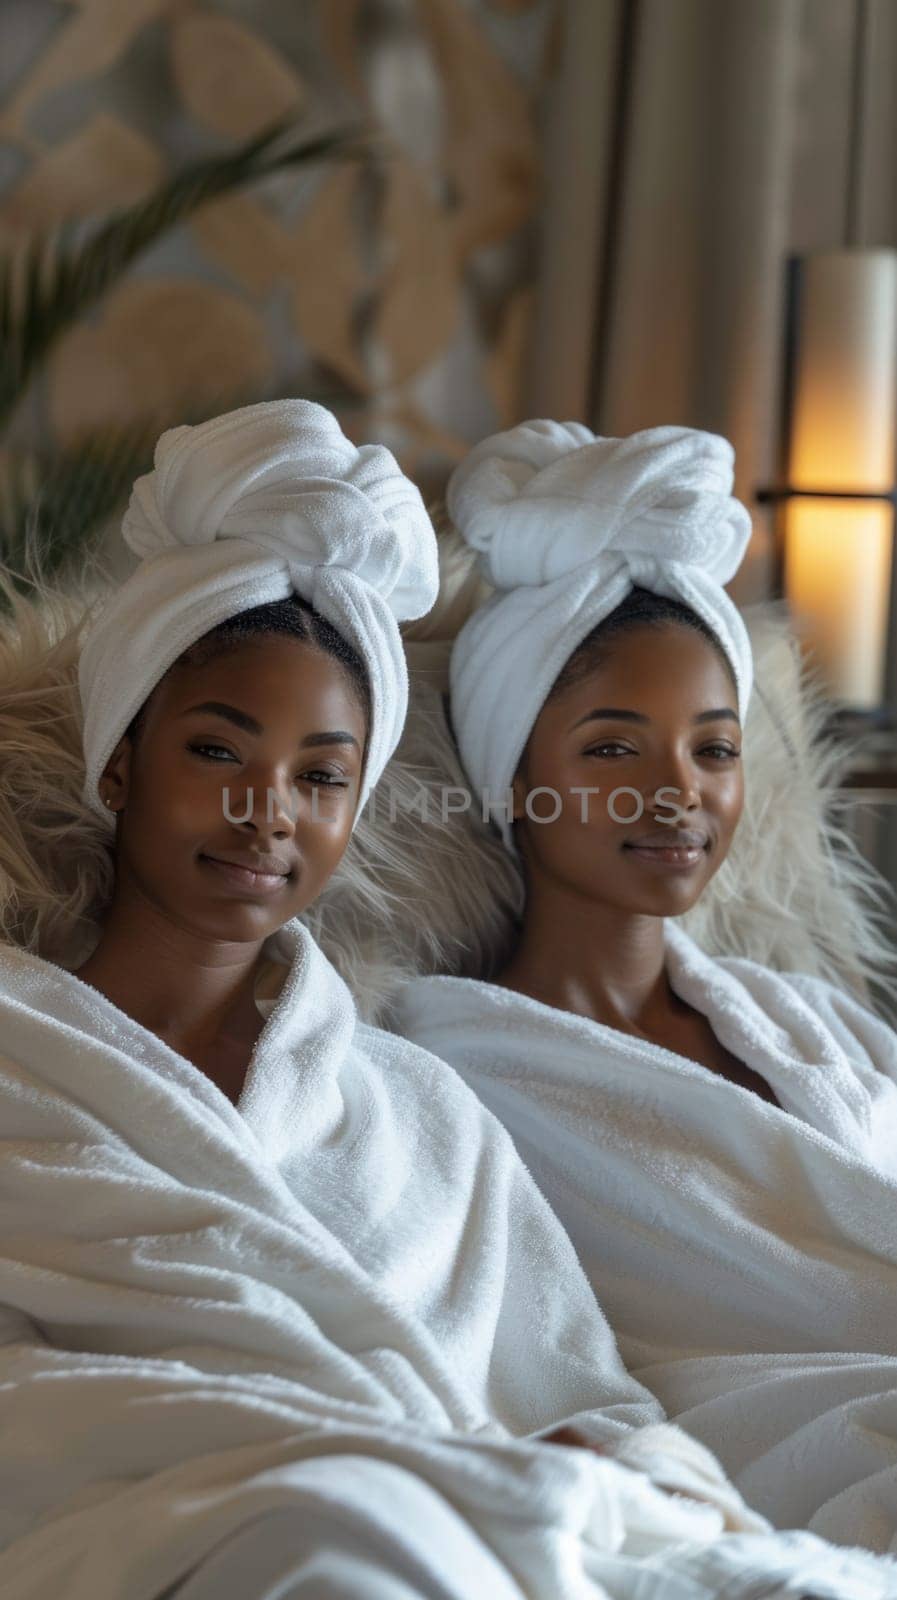 Two women are wrapped in towels and sitting on a couch